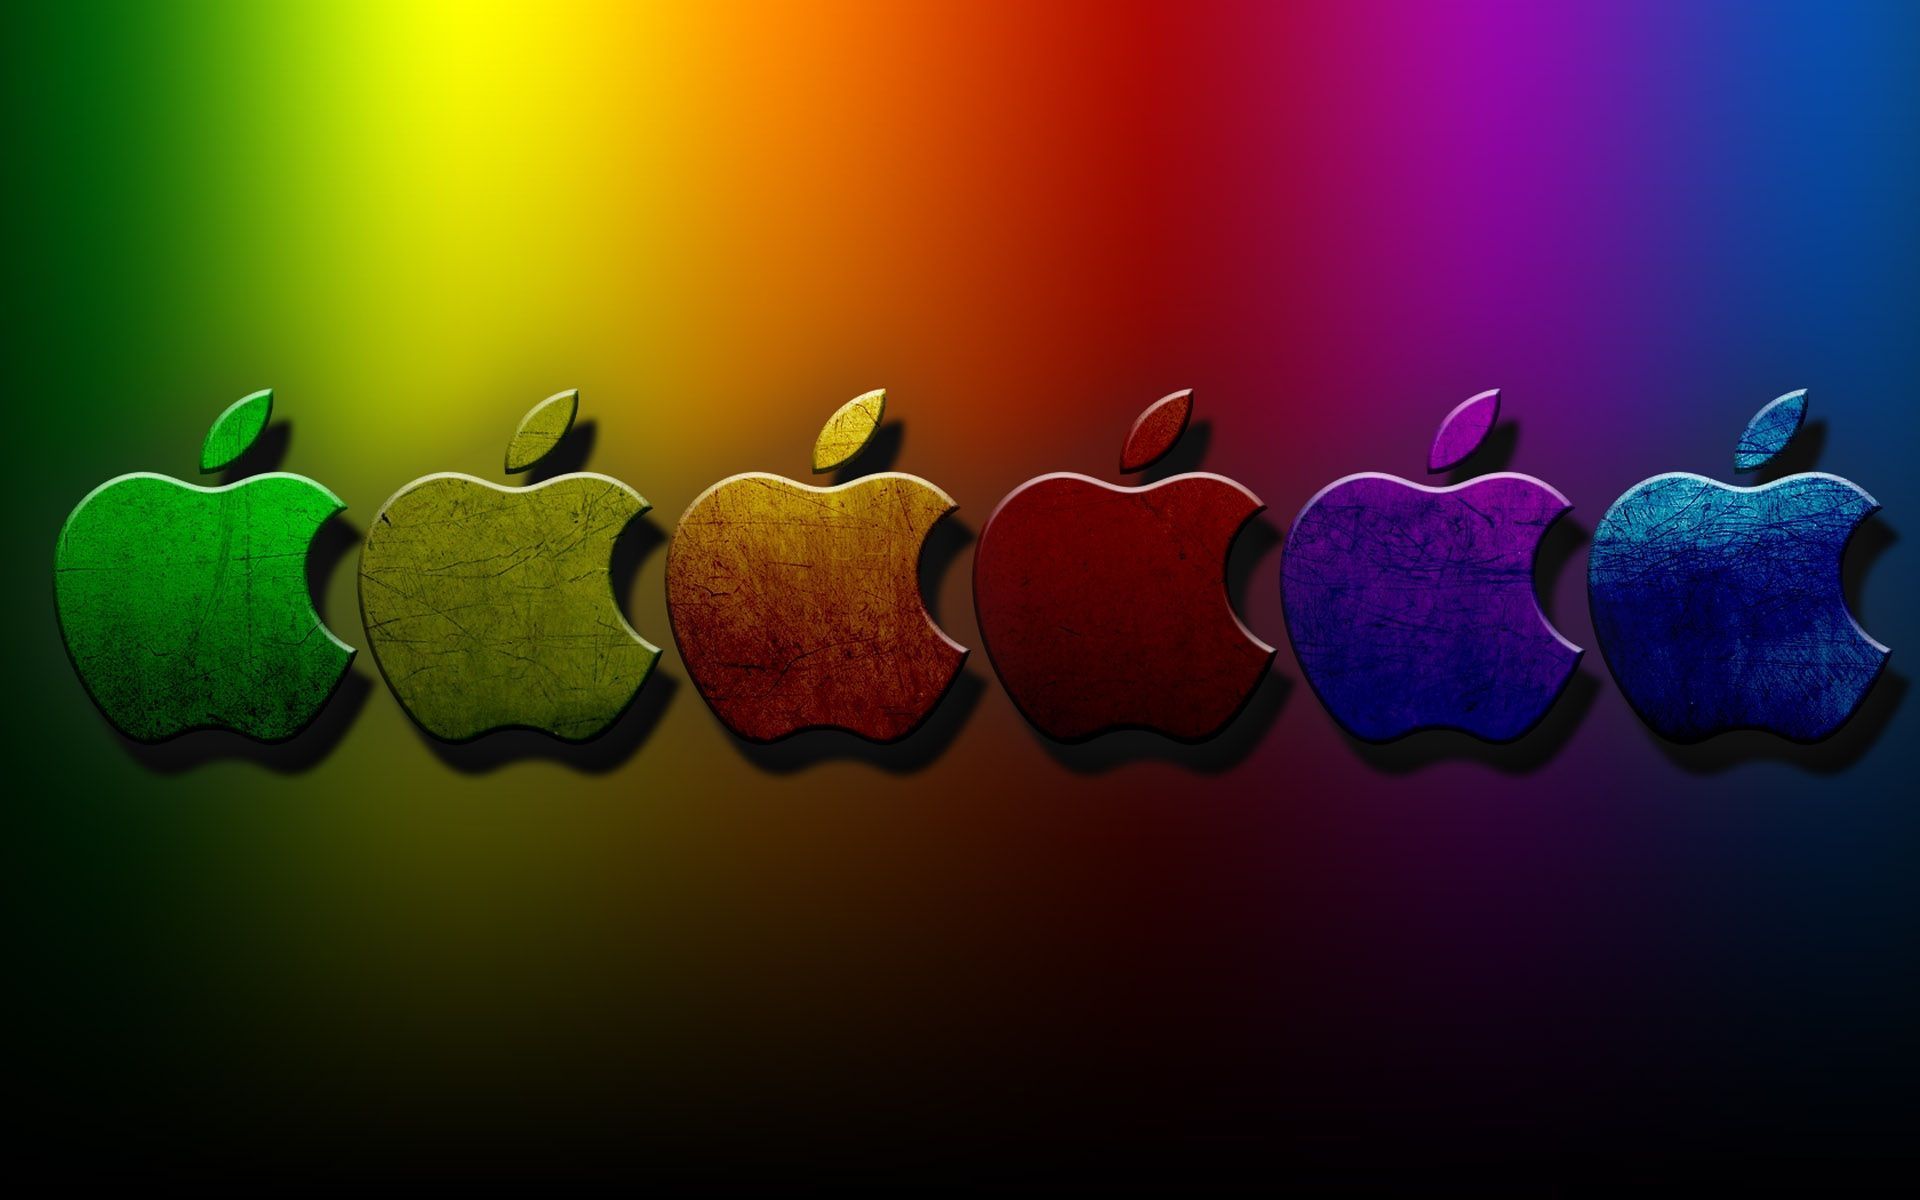 Top Download Colorful 3d Apple Images for Pinterest